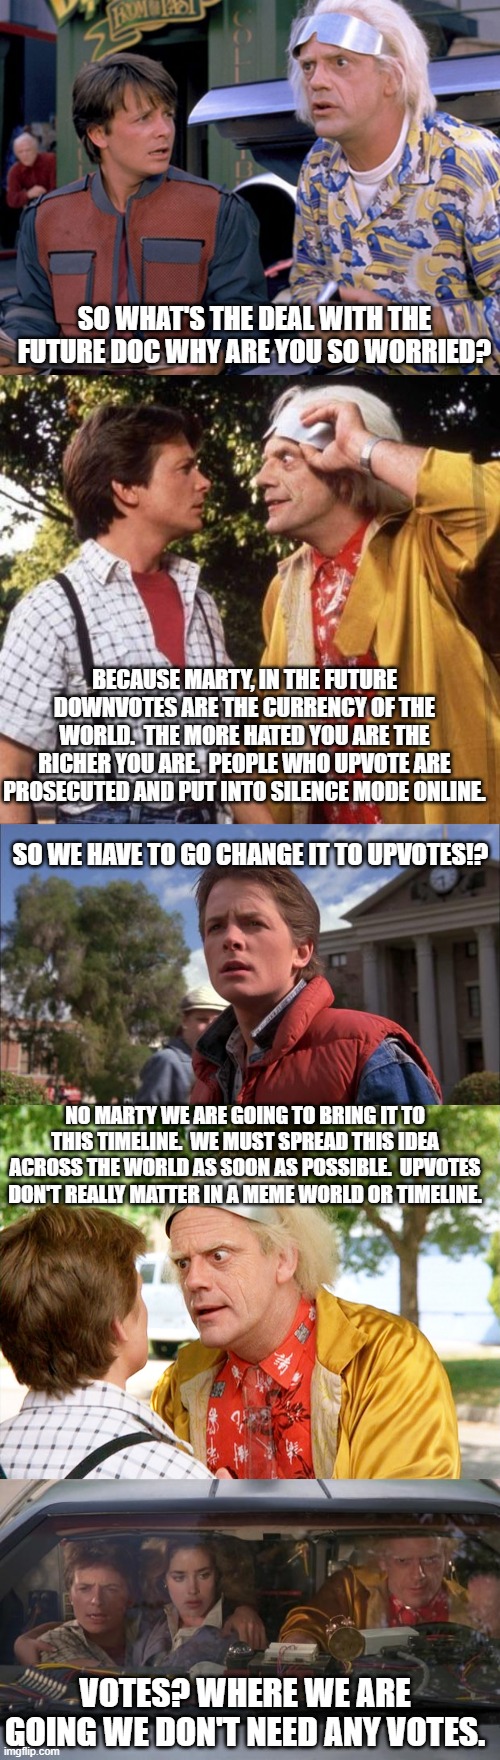 Upvotes do not pay any more than downvotes. | SO WHAT'S THE DEAL WITH THE FUTURE DOC WHY ARE YOU SO WORRIED? BECAUSE MARTY, IN THE FUTURE DOWNVOTES ARE THE CURRENCY OF THE WORLD.  THE MORE HATED YOU ARE THE RICHER YOU ARE.  PEOPLE WHO UPVOTE ARE PROSECUTED AND PUT INTO SILENCE MODE ONLINE. SO WE HAVE TO GO CHANGE IT TO UPVOTES!? NO MARTY WE ARE GOING TO BRING IT TO THIS TIMELINE.  WE MUST SPREAD THIS IDEA ACROSS THE WORLD AS SOON AS POSSIBLE.  UPVOTES DON'T REALLY MATTER IN A MEME WORLD OR TIMELINE. VOTES? WHERE WE ARE GOING WE DON'T NEED ANY VOTES. | image tagged in back to the future,doc brown marty mcfly,marty mcfly,back to the future roads | made w/ Imgflip meme maker